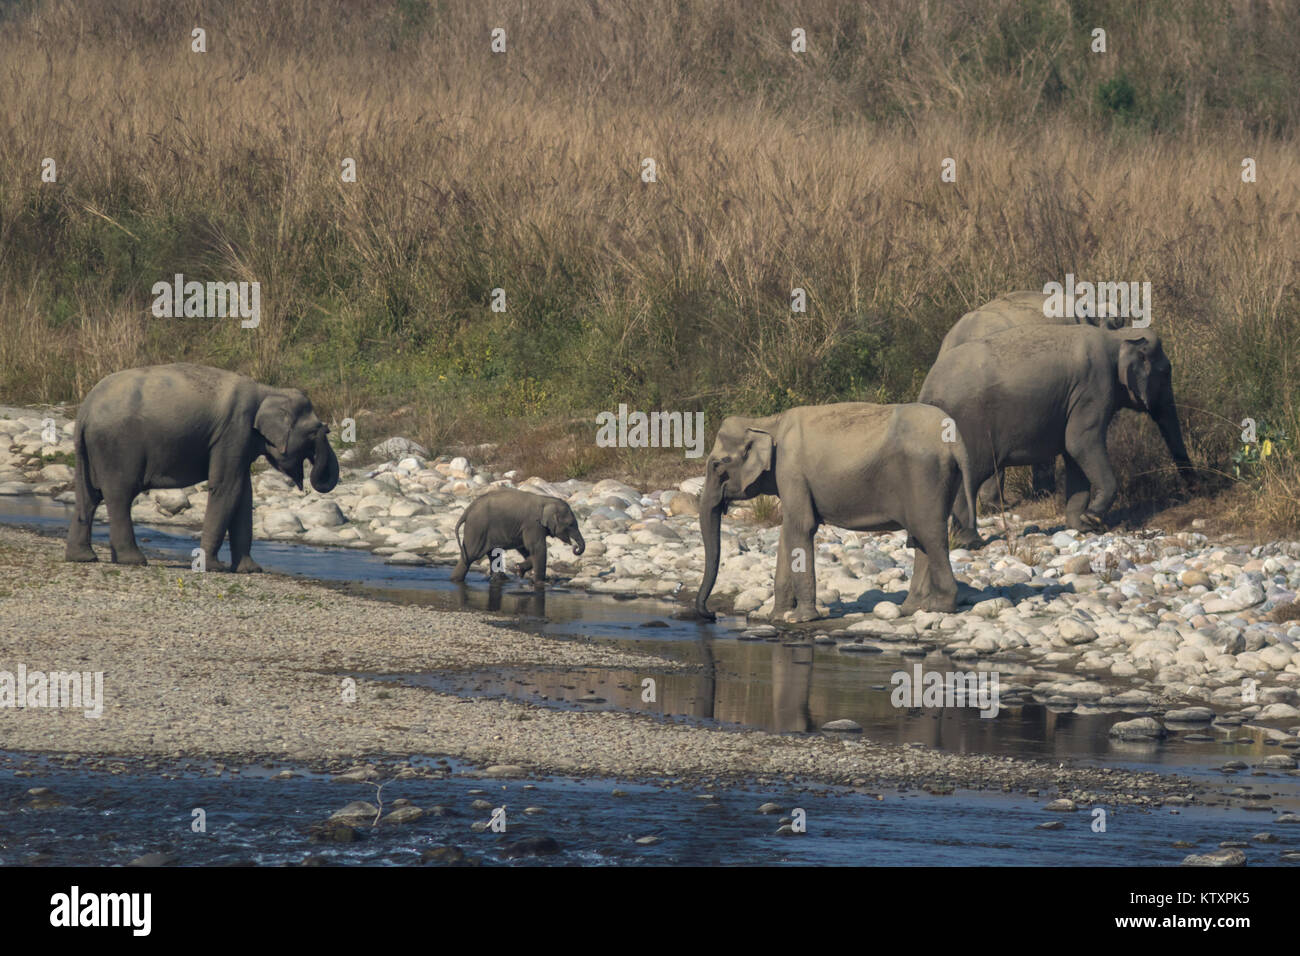 The Indian elephant (Elephas maximus indicus) drinking water in the Ramganga river in Jim Corbett Tiger Reserve in Uttarakhand, India. Stock Photo